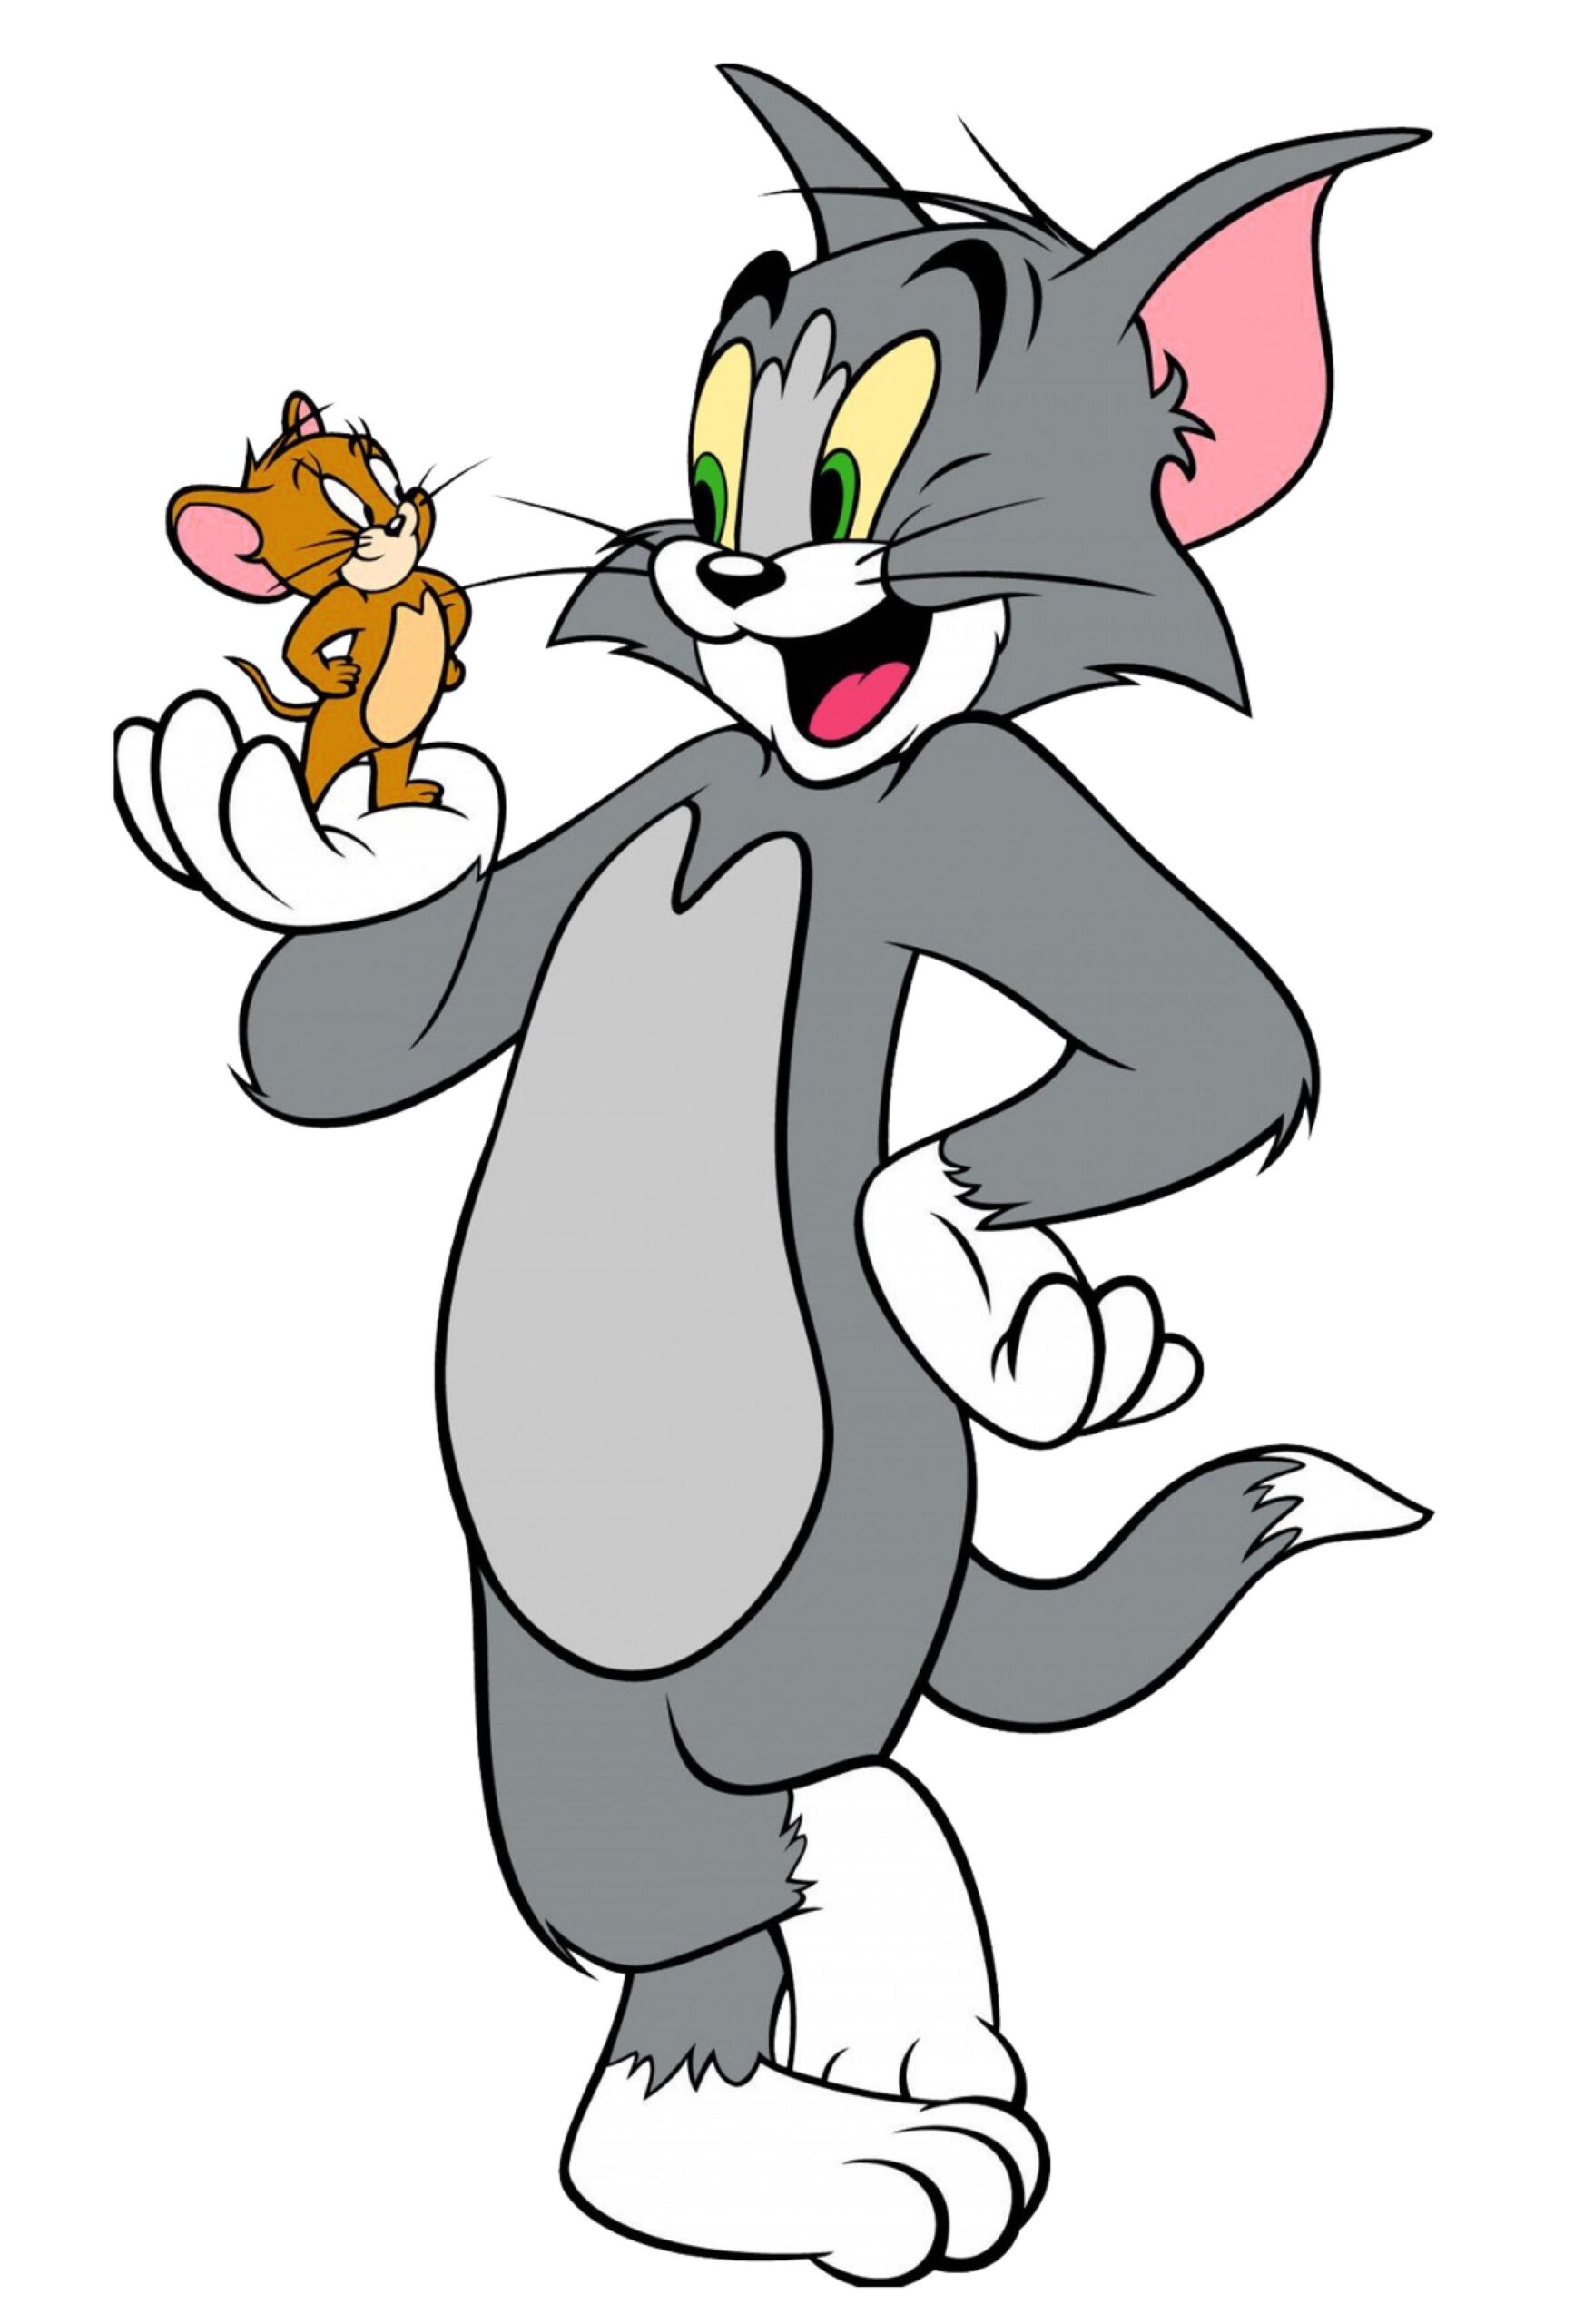 Tom and Jerry poses by kaylor2013 on DeviantArt